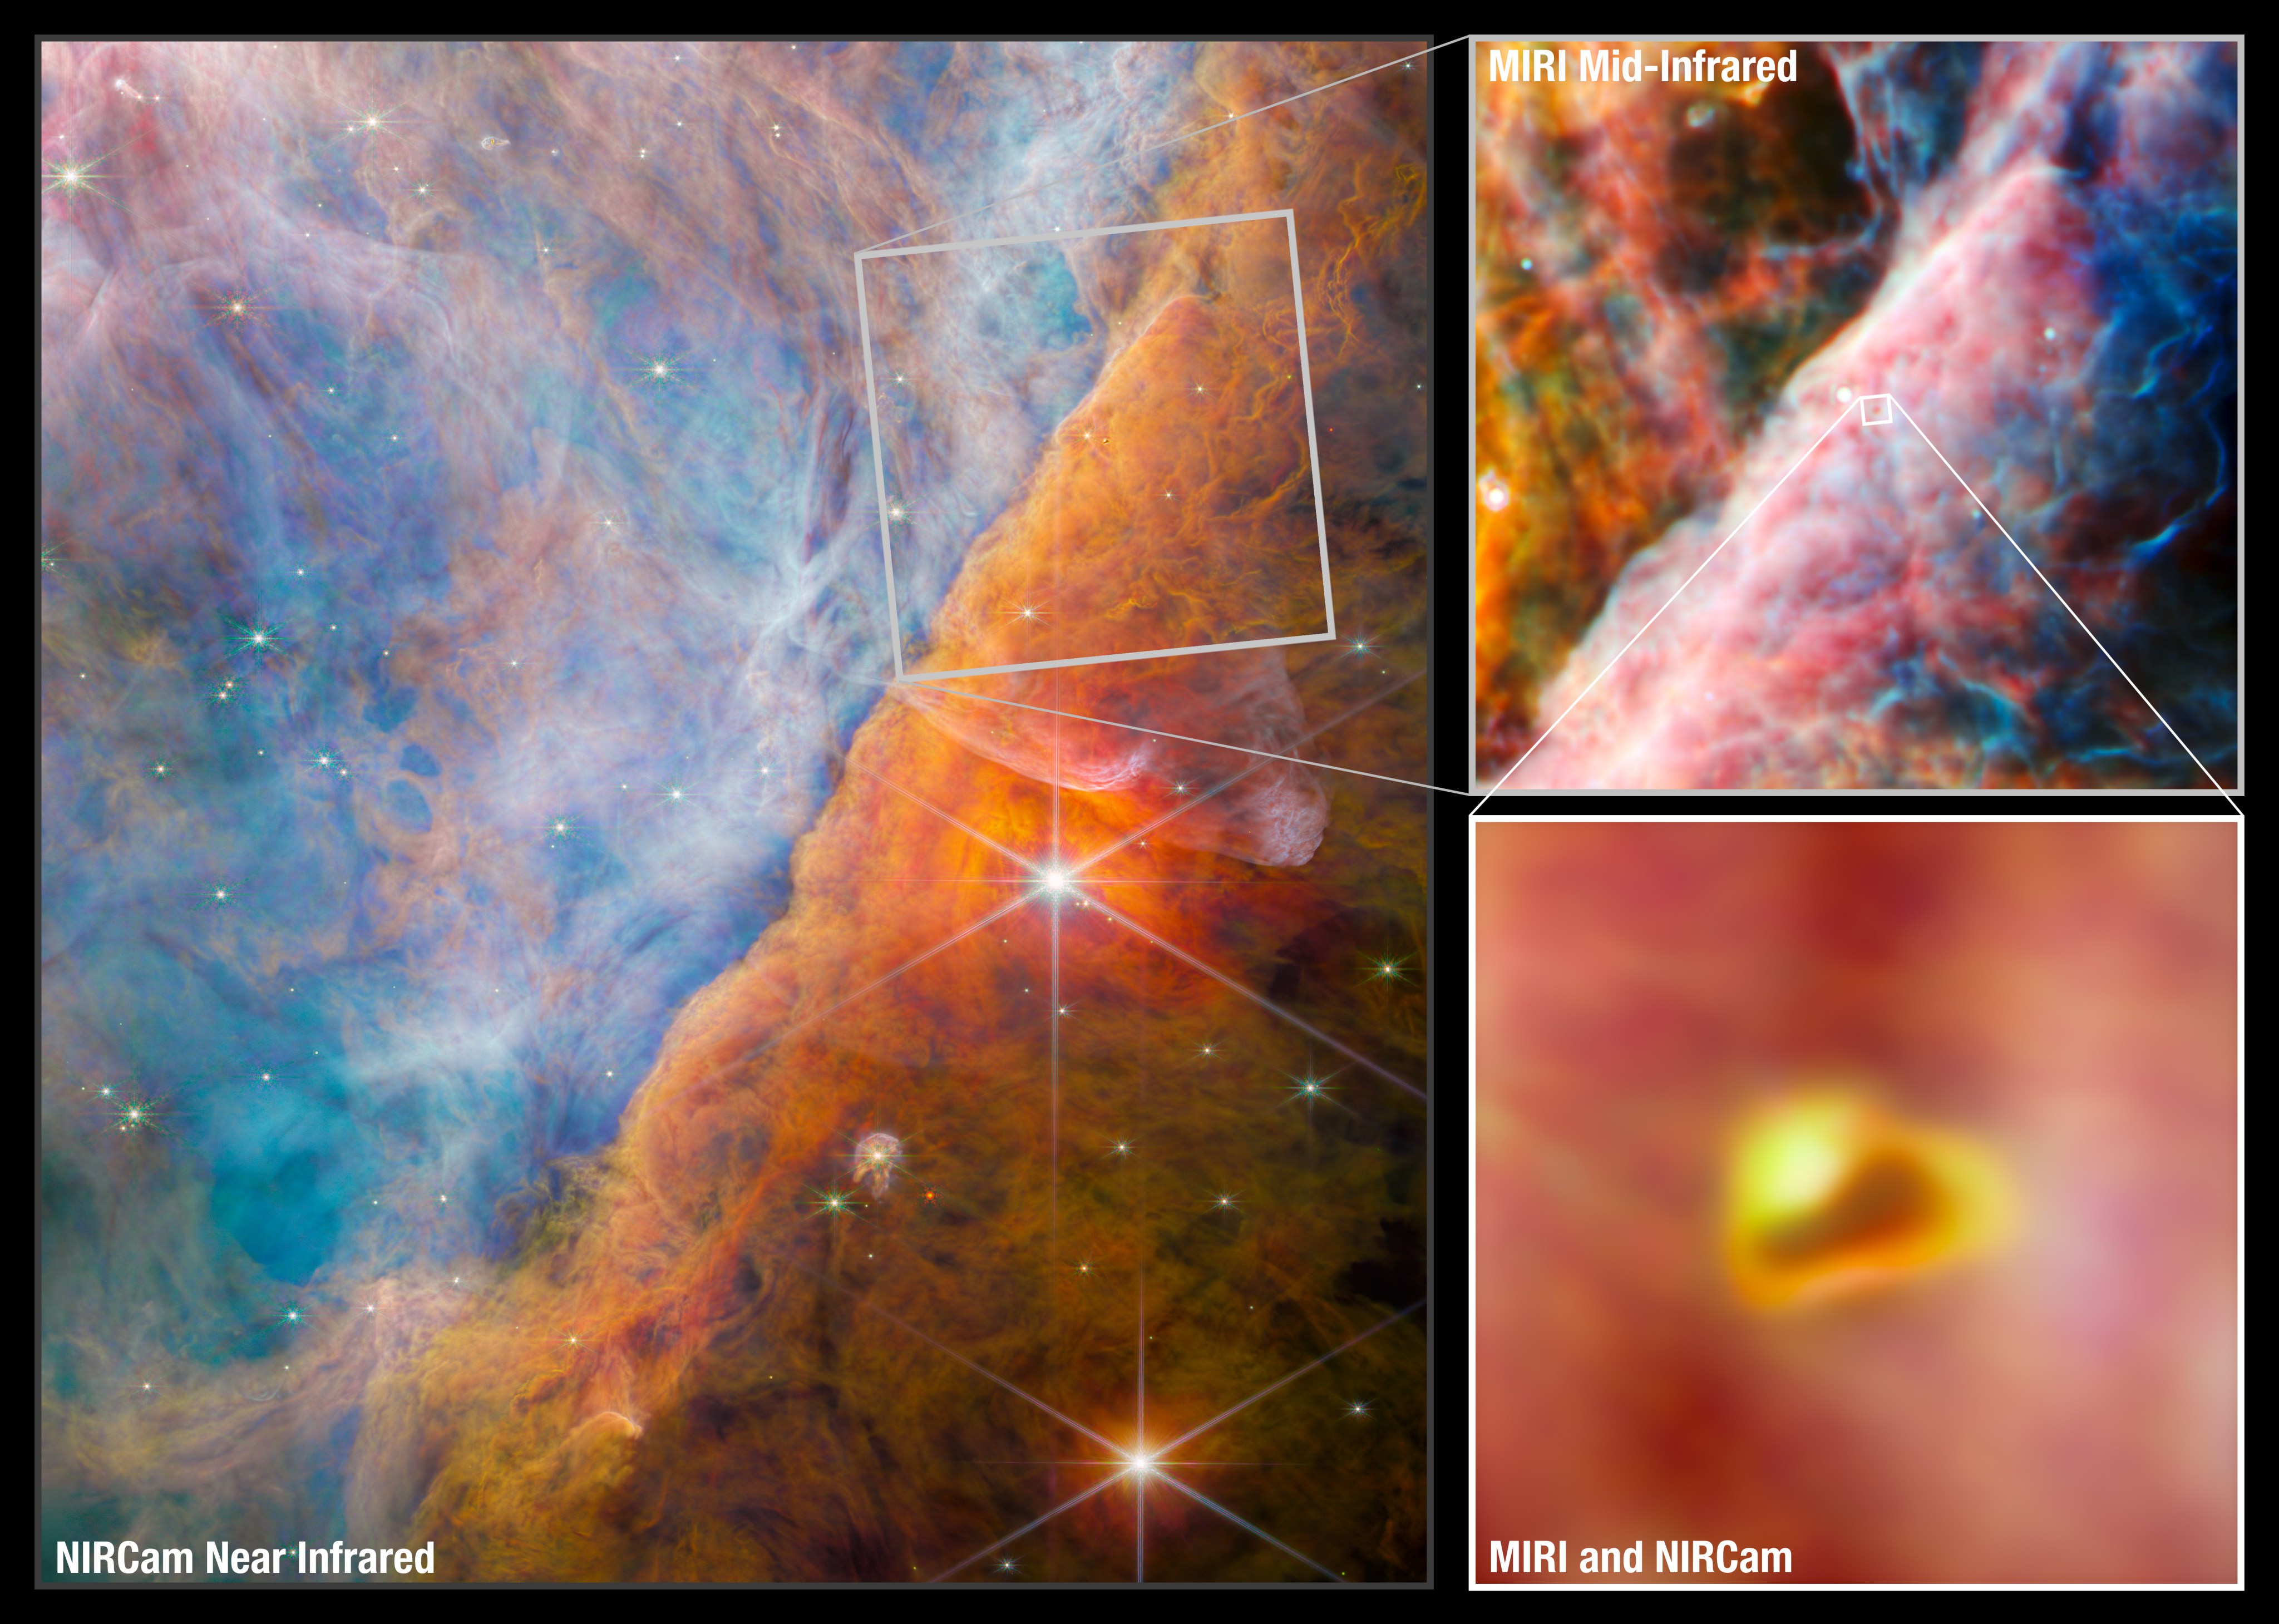 An image made of three panels. The largest on the left shows the NIRCam image of a nebula with two bright stars. Billowy, multi-hued clouds fill the field of view. The scene is divided by an undulating formation running from lower left to upper right. On the left side, the clouds are various shades of blue with some translucent orange wisps throughout. On the right side, the clouds vary from bright orange-red to brown as you go from left to right.